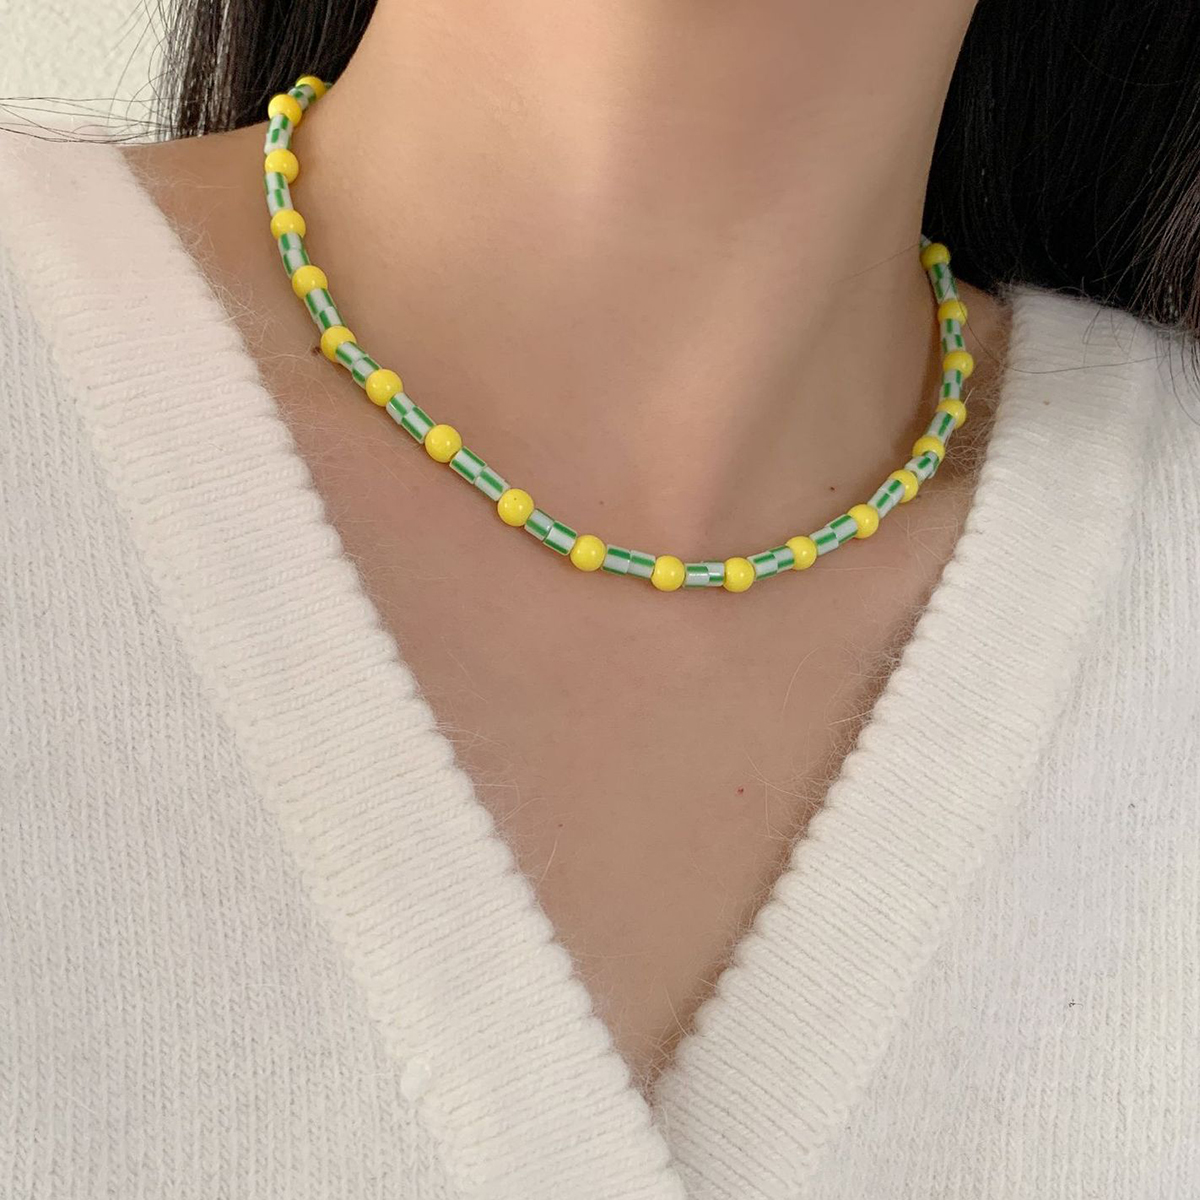 AENSOA Bohemia Candy Color Acrylic Beads Choker Necklace for Women Girls Red Yellow Beaded Clavicle Chain Necklace Jewelry 2022